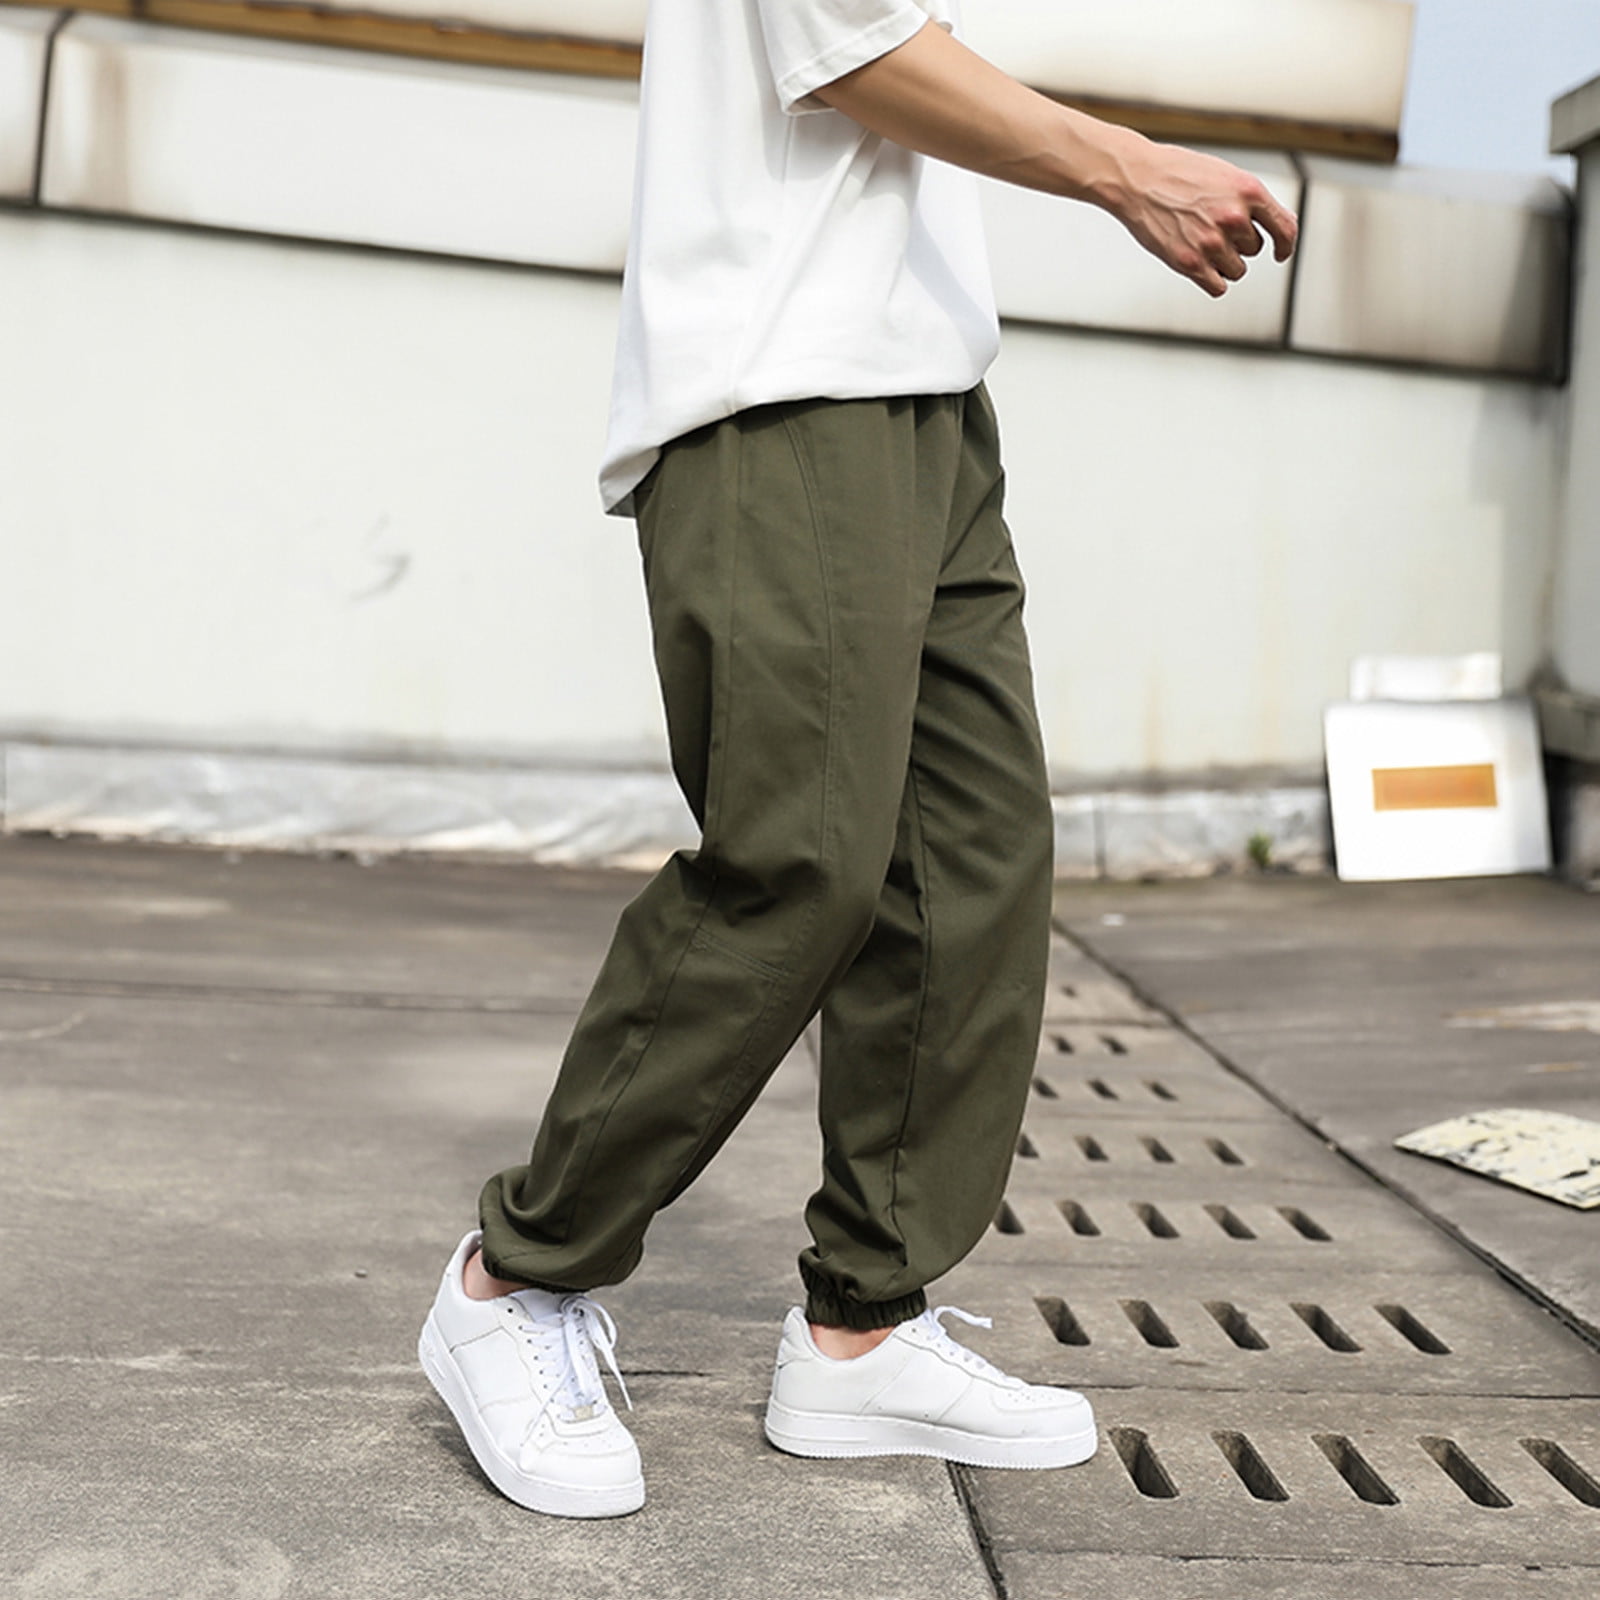 Cargo Pants for Men: 5 Great Outfits + Top 11 Style Mistakes